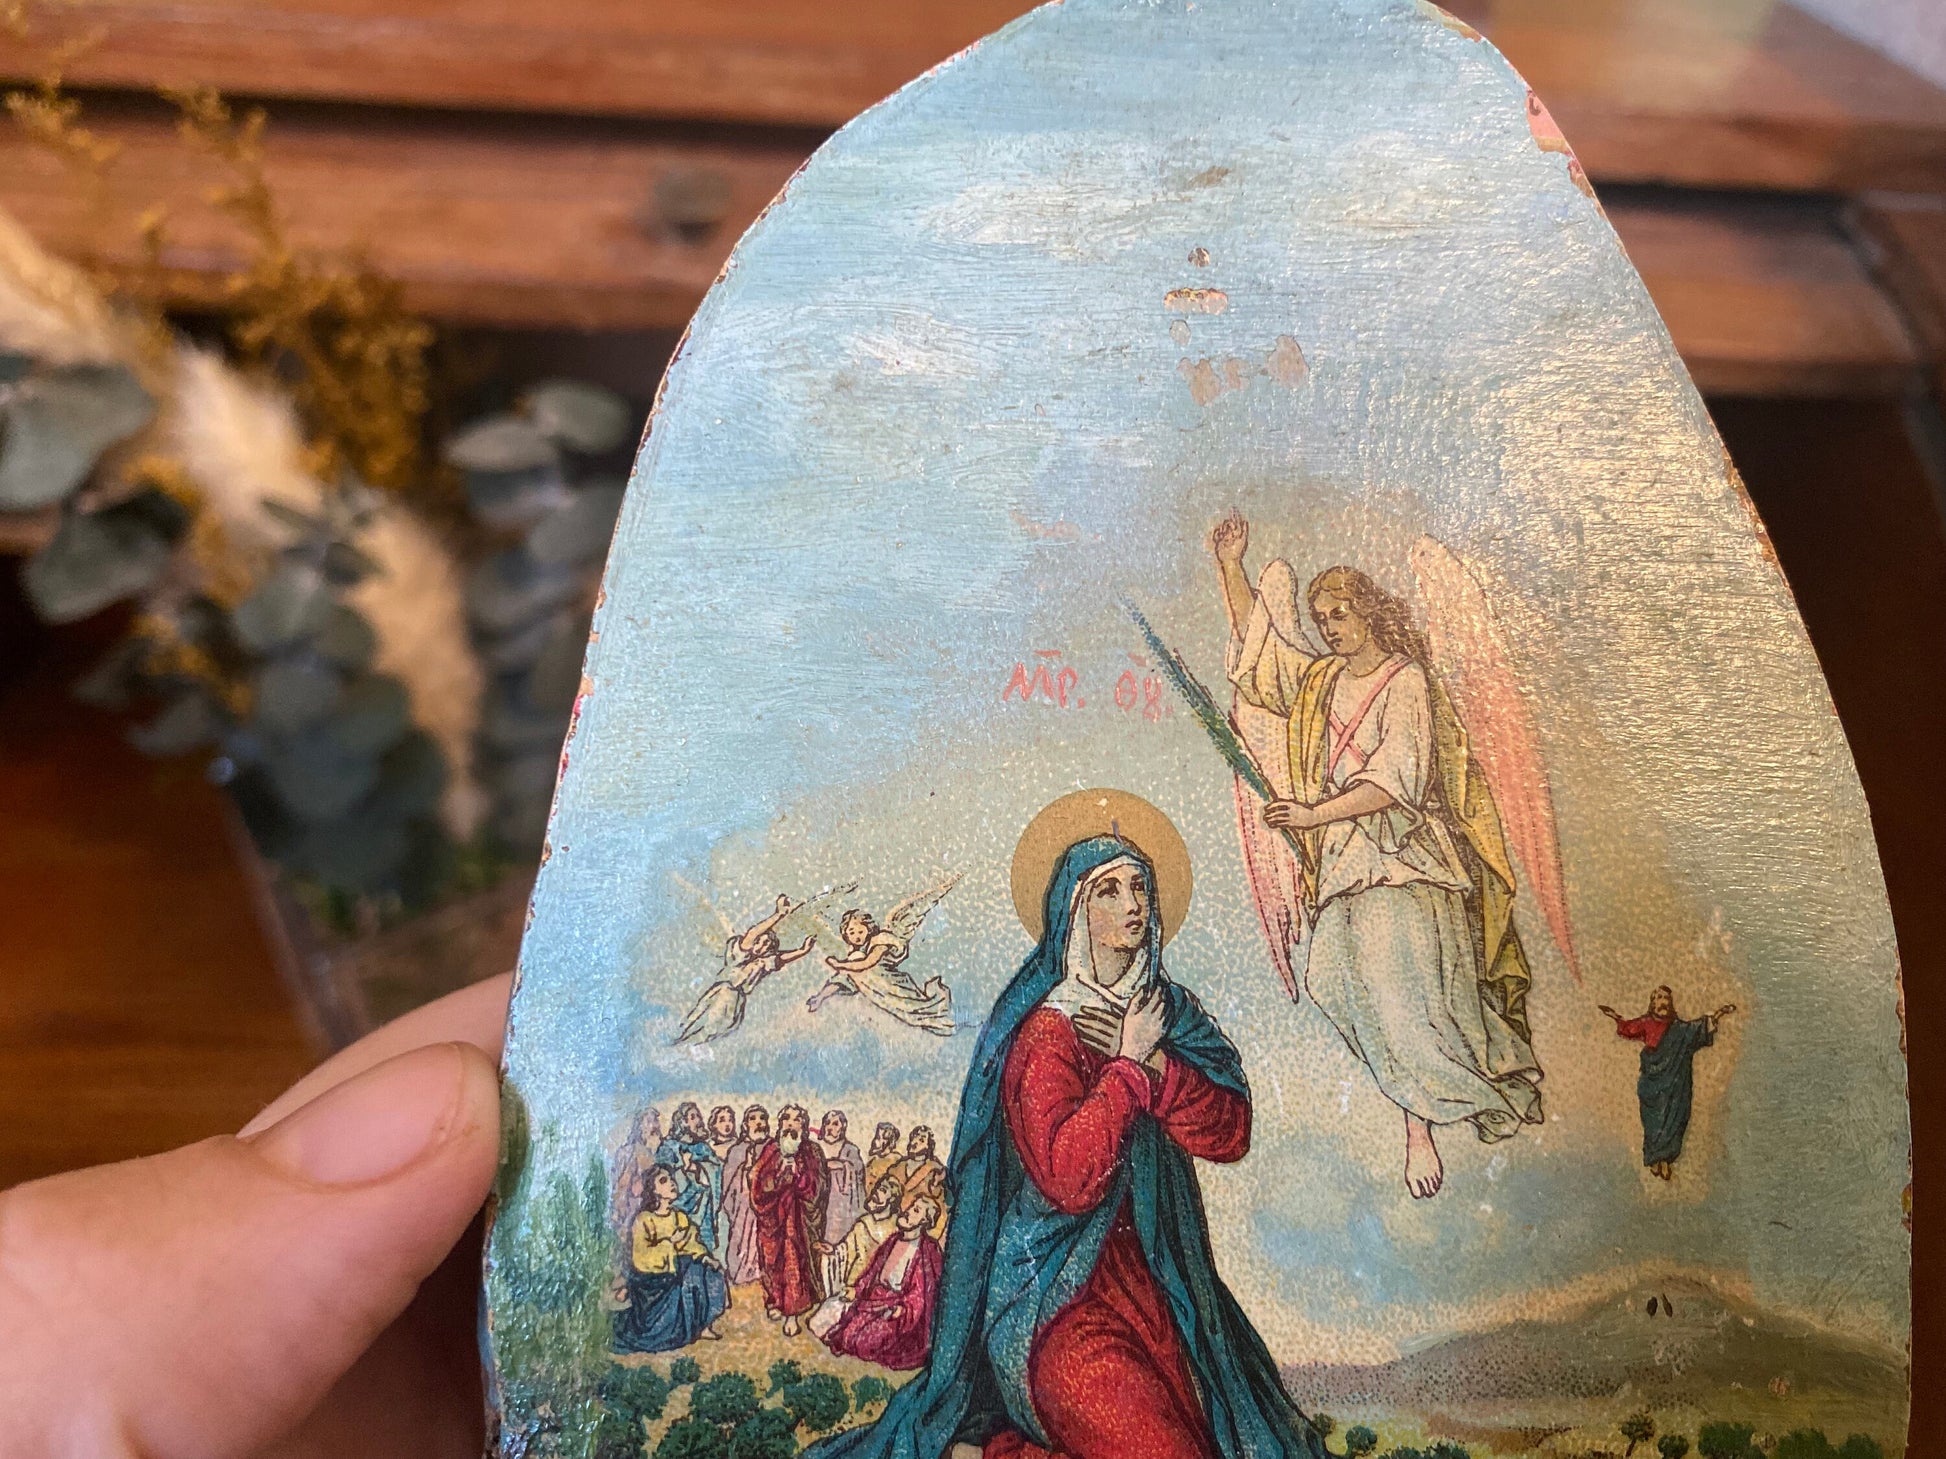 Vintage religious wood slice art with depiction of the Virgin Mary and the Ascension of Jesus on real rustic wood. Catholic home decor.